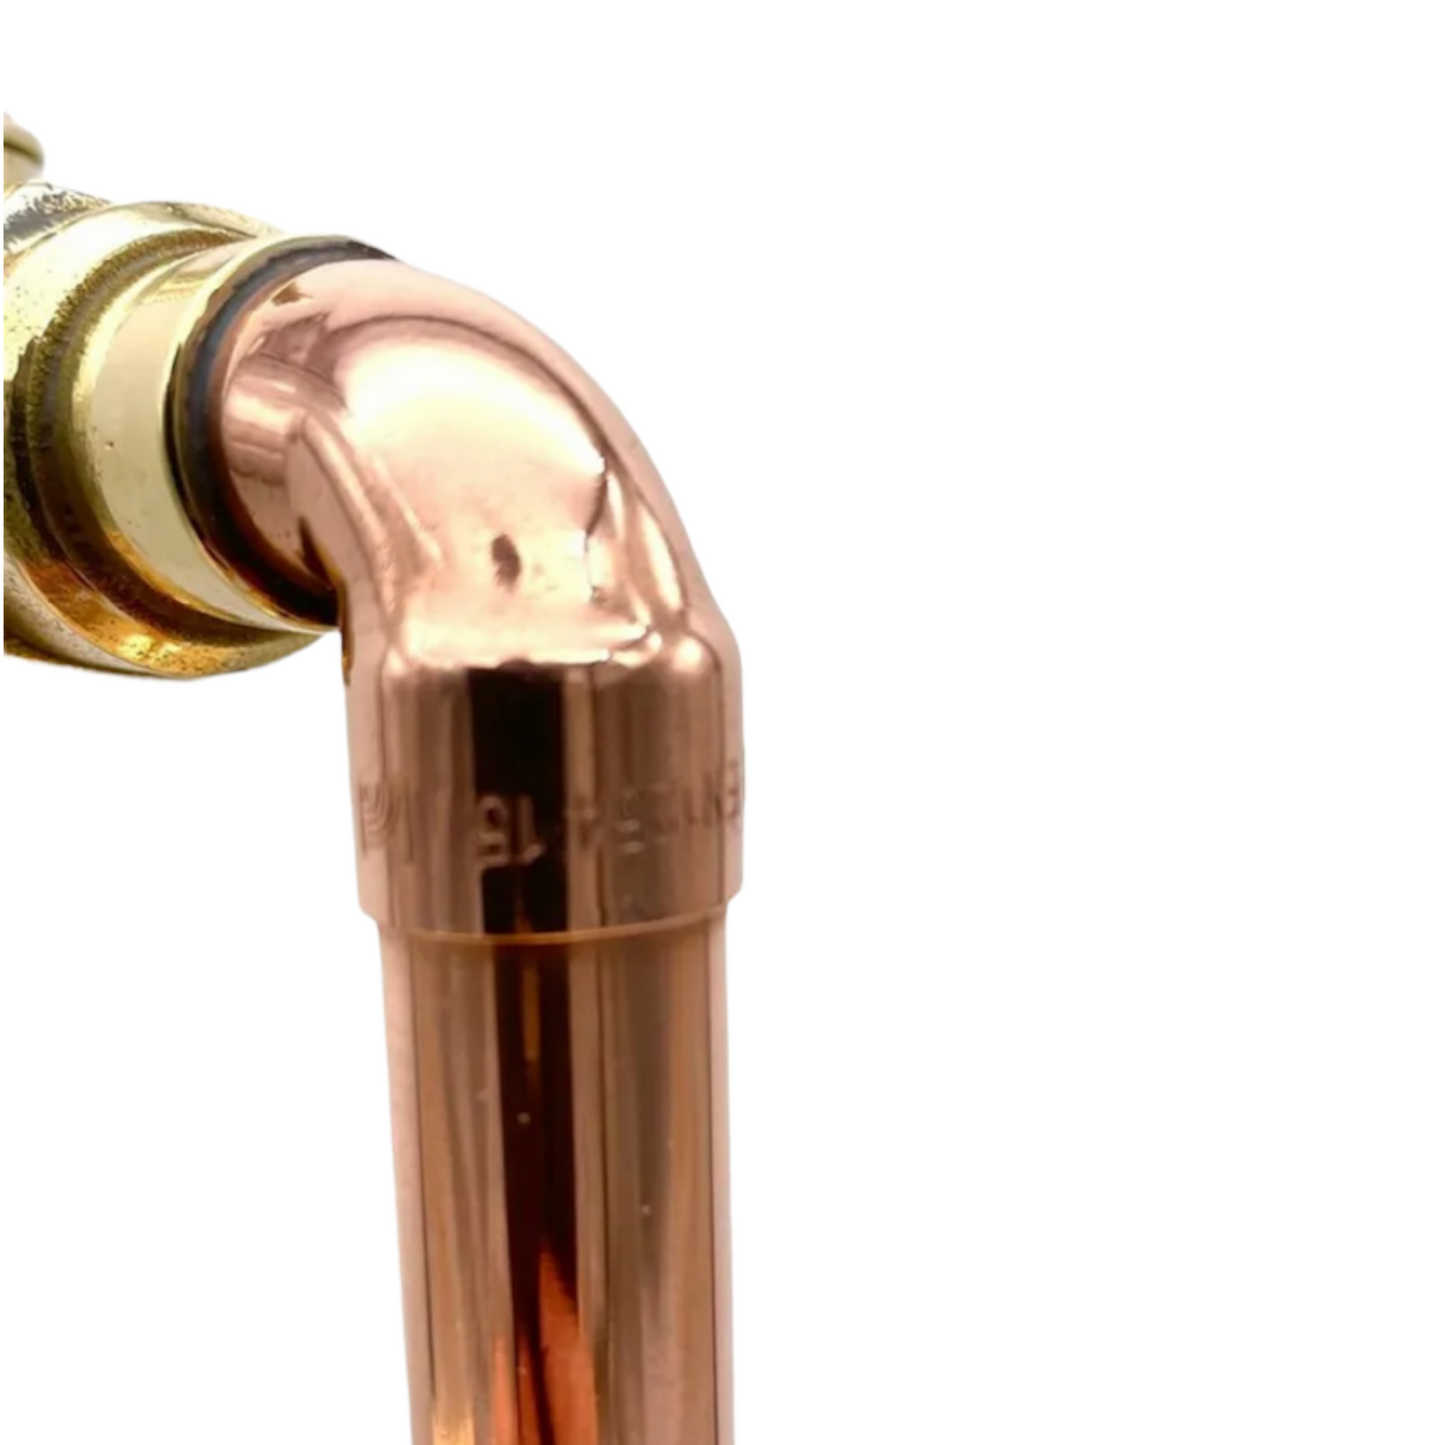 copper bend of Vintage style copper and brass tap sold by All Things French Store